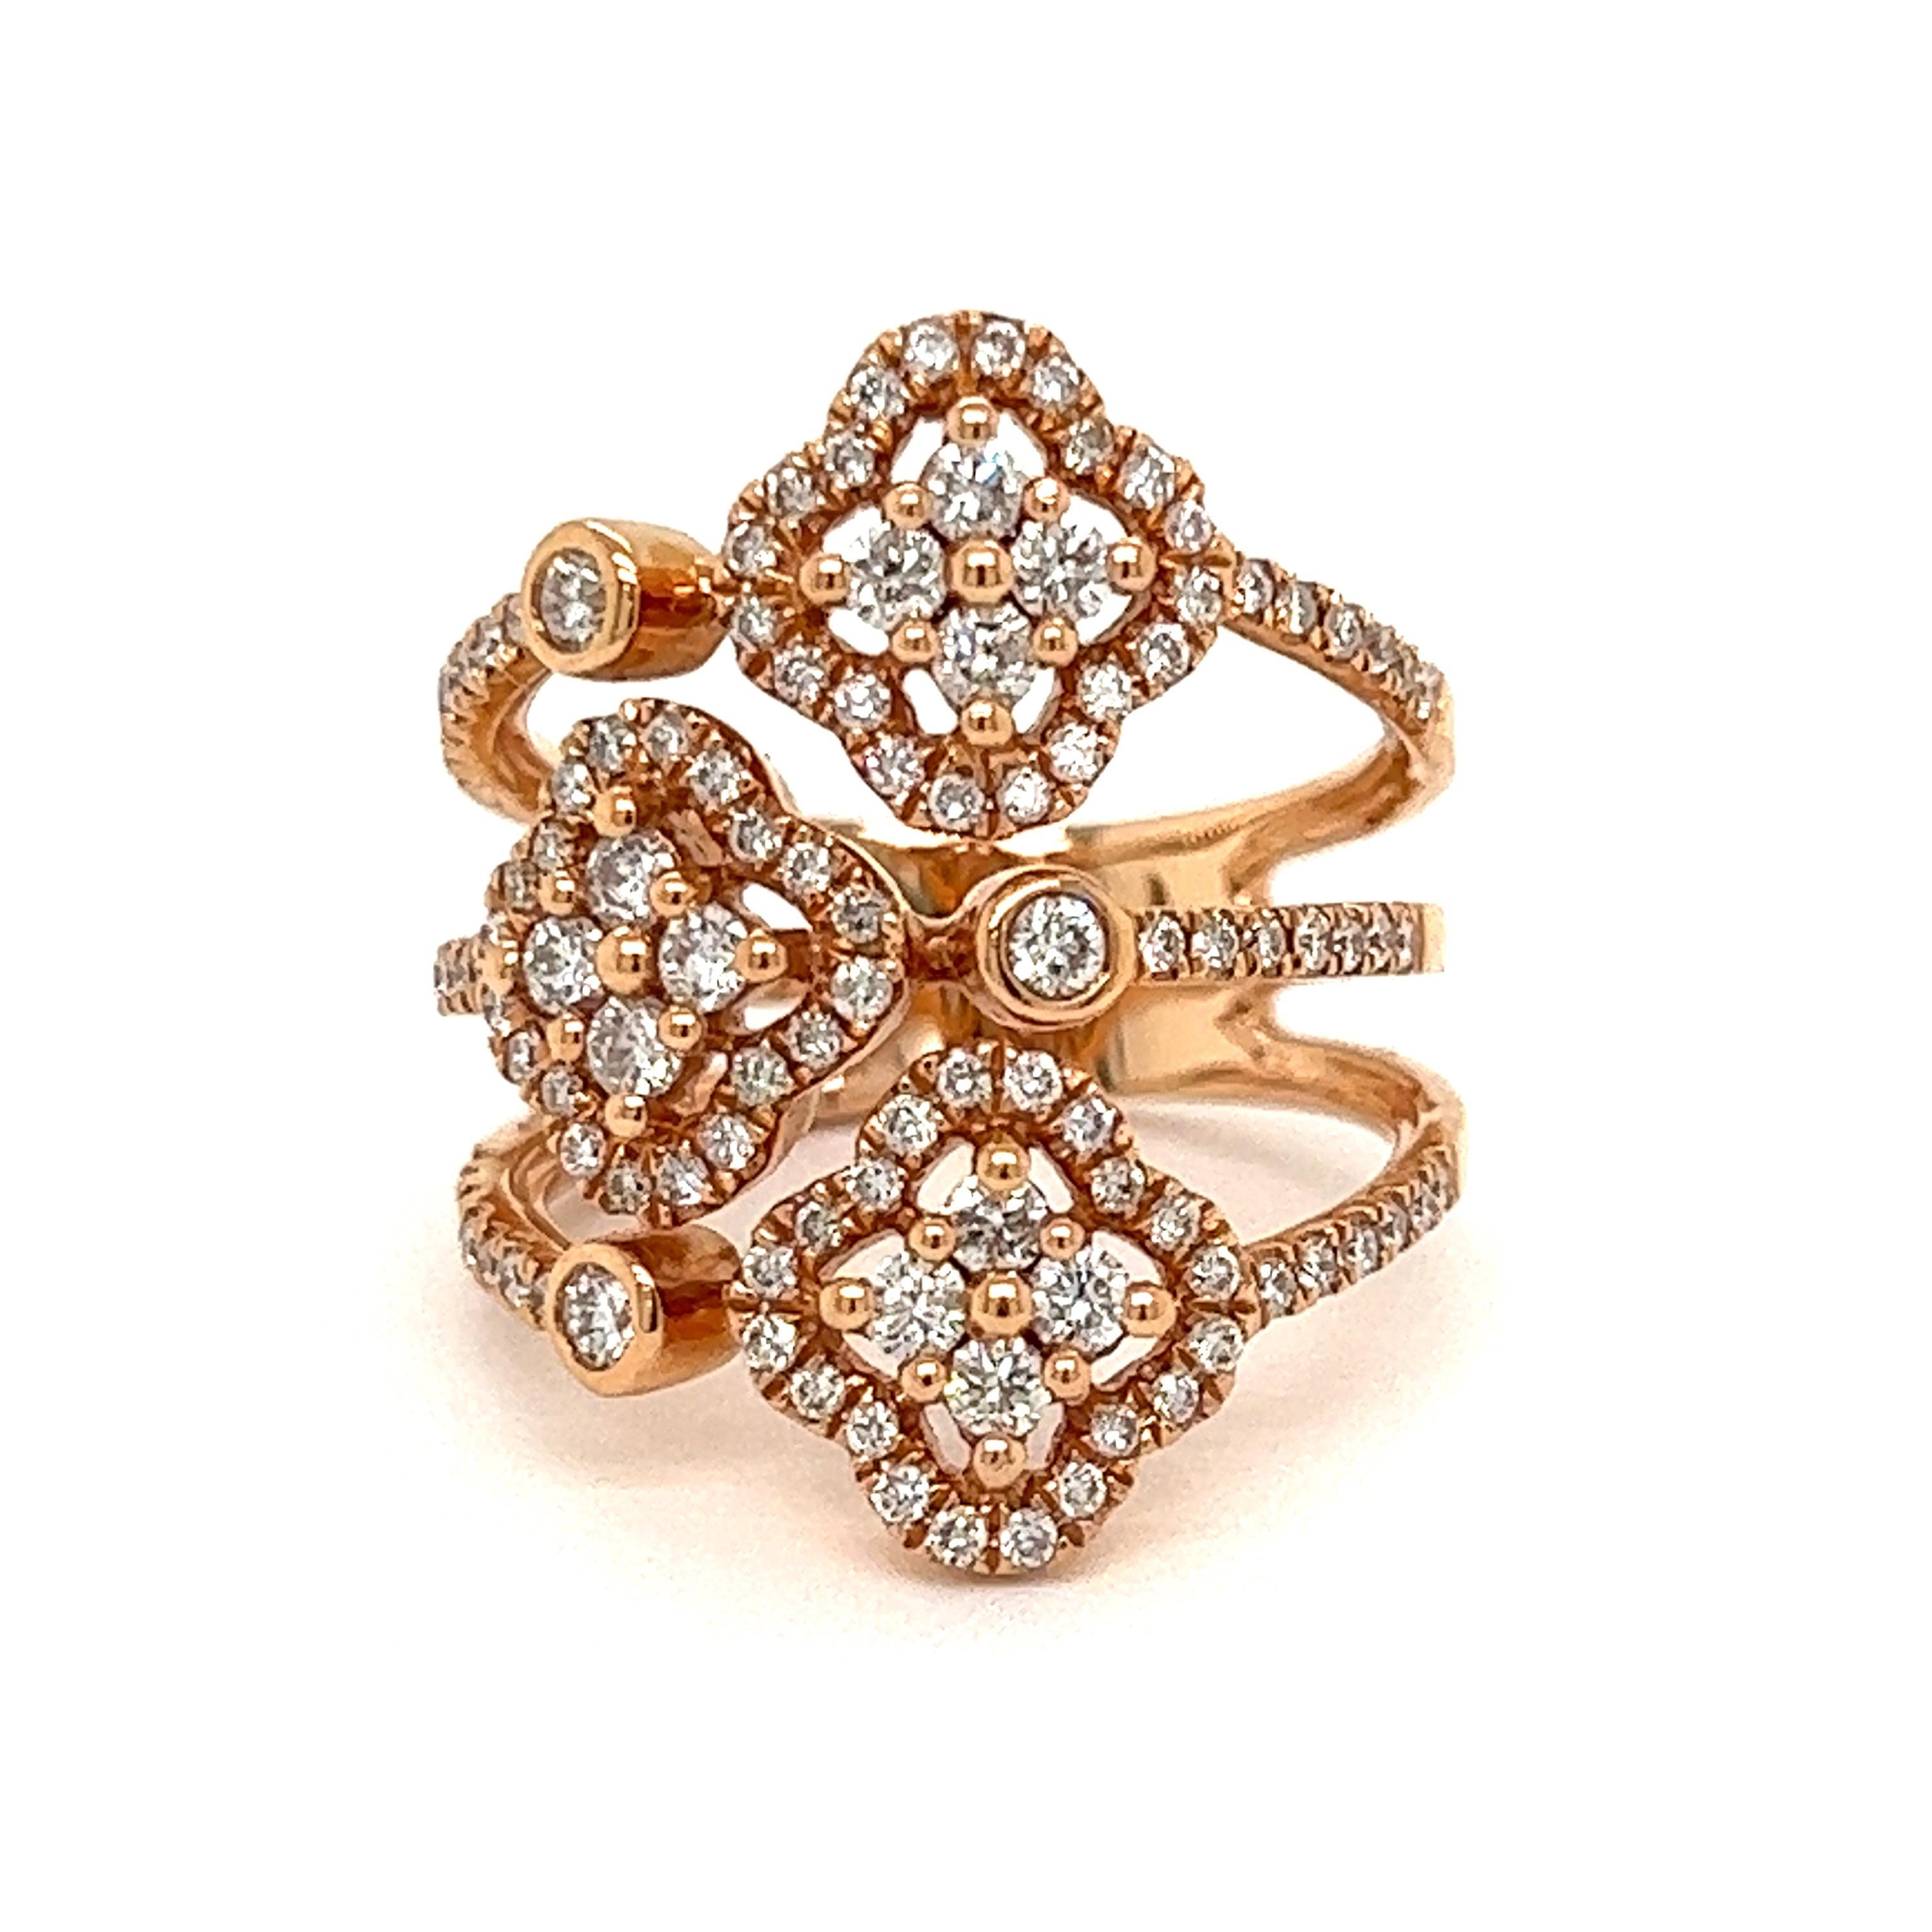 This multi row ring is a unique play on the iconic four leaf clover design.   Approximately 2 ctw in shimmering round diamonds. Set in 7.50 grams of 18K rose gold this outstanding ring makes a statement.  Perfect for an anniversary gift, push